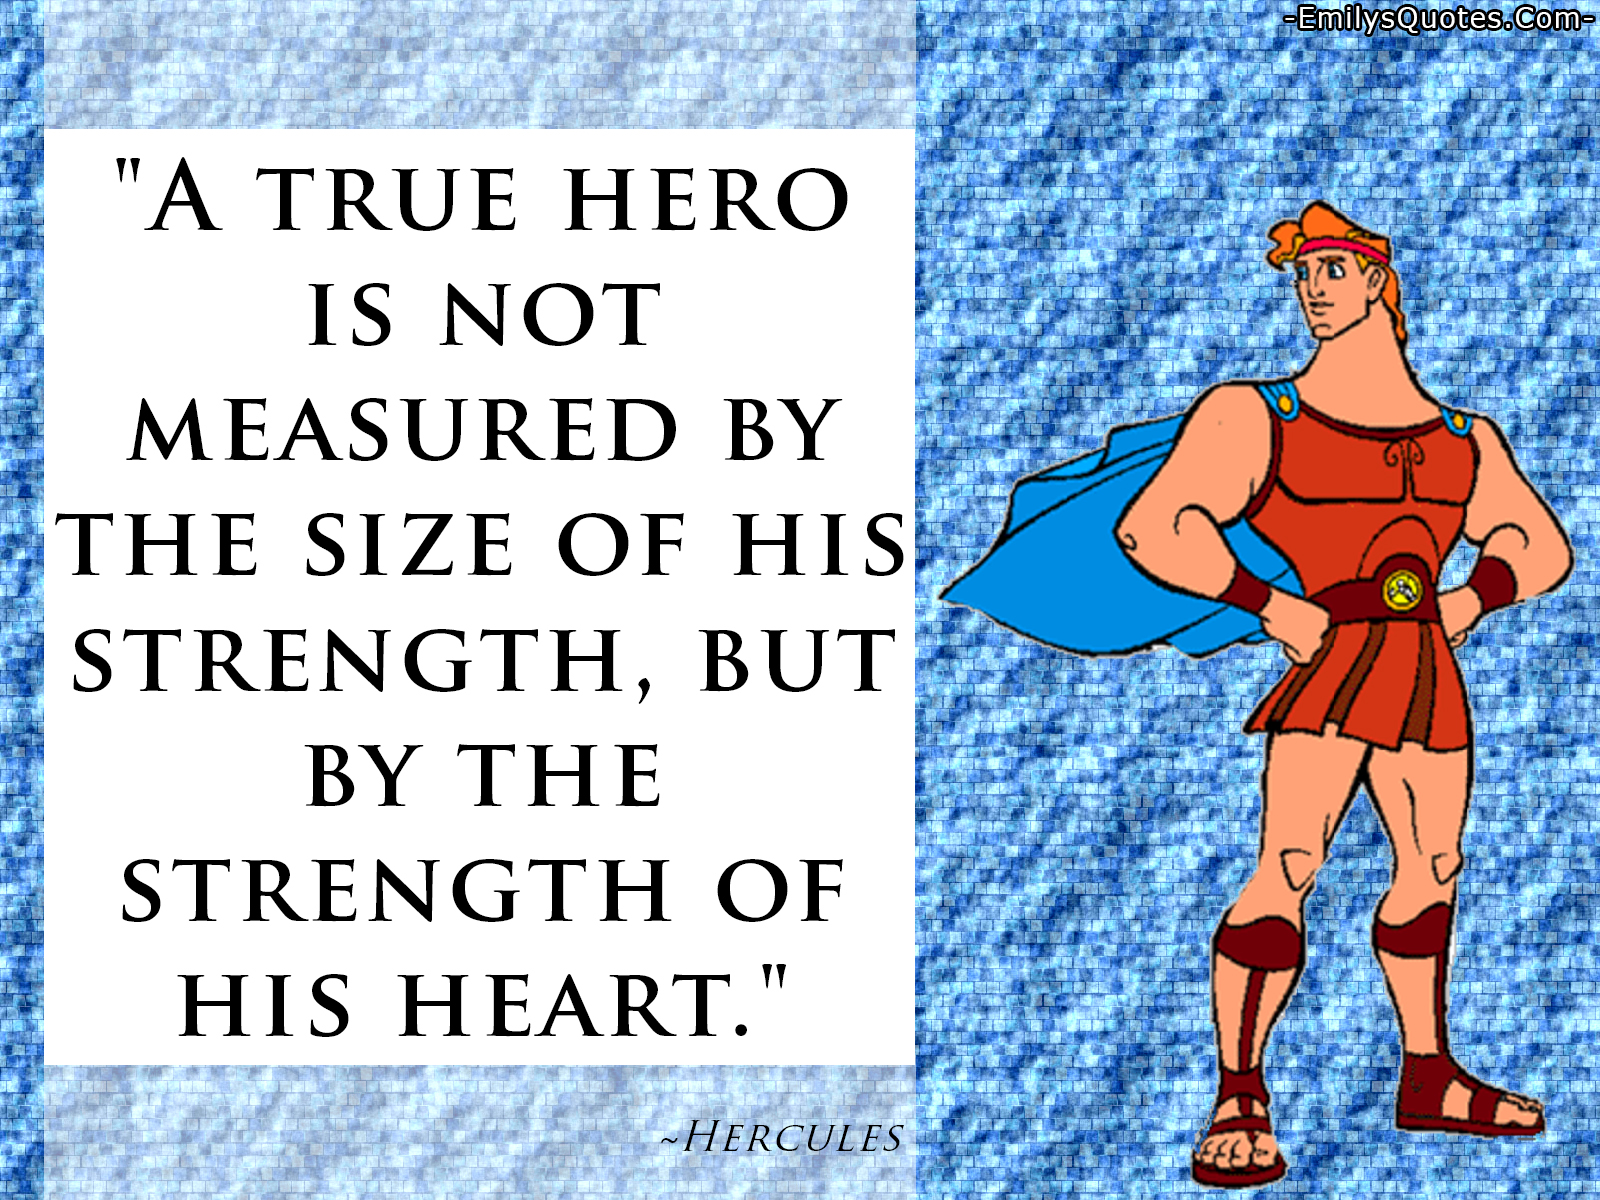 A true hero is not measured by the size of his strength, but by the